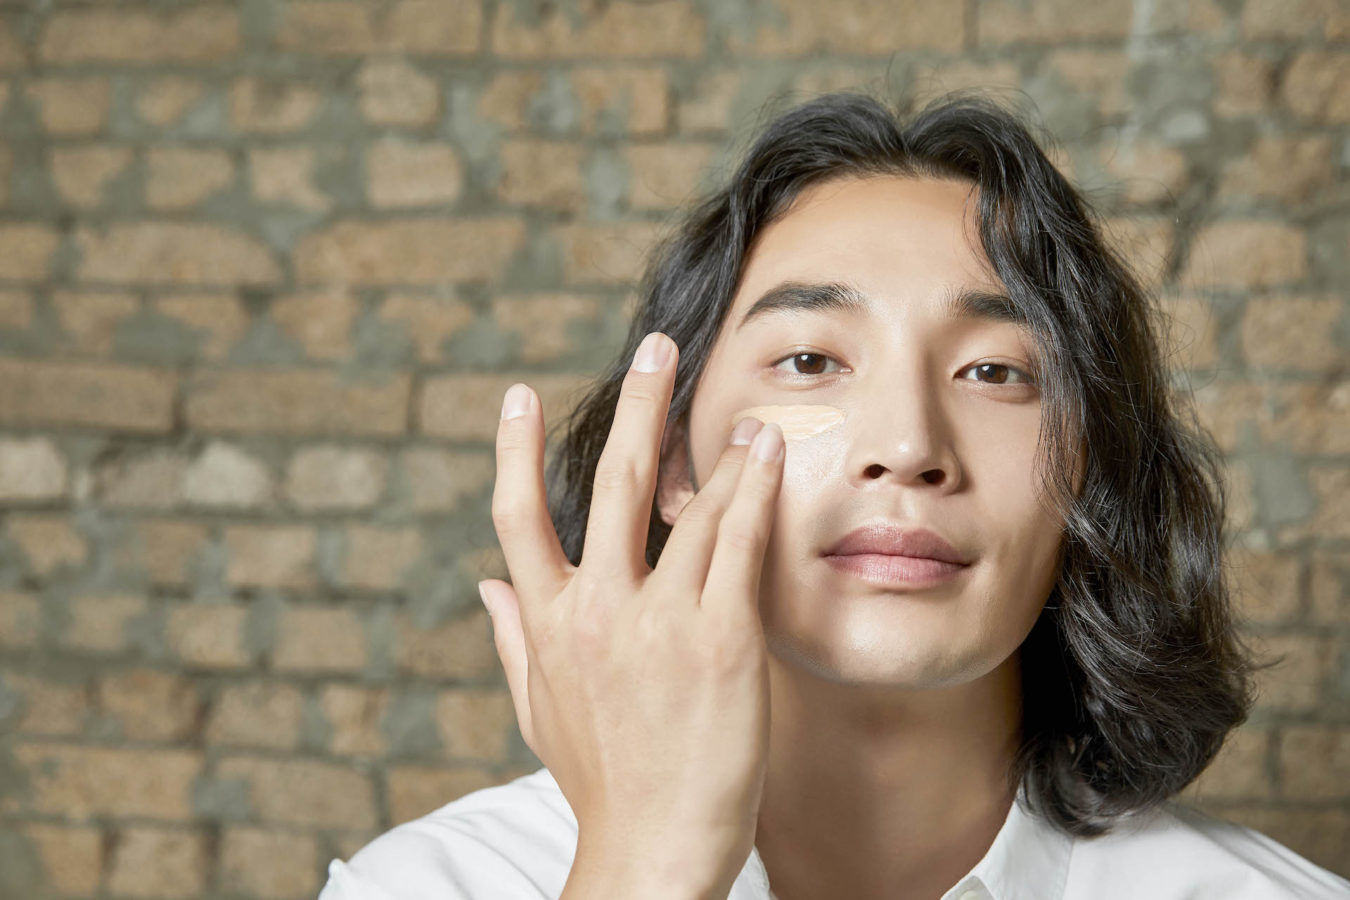 Dr Lisa Chan on Body and Facial Contouring for Men